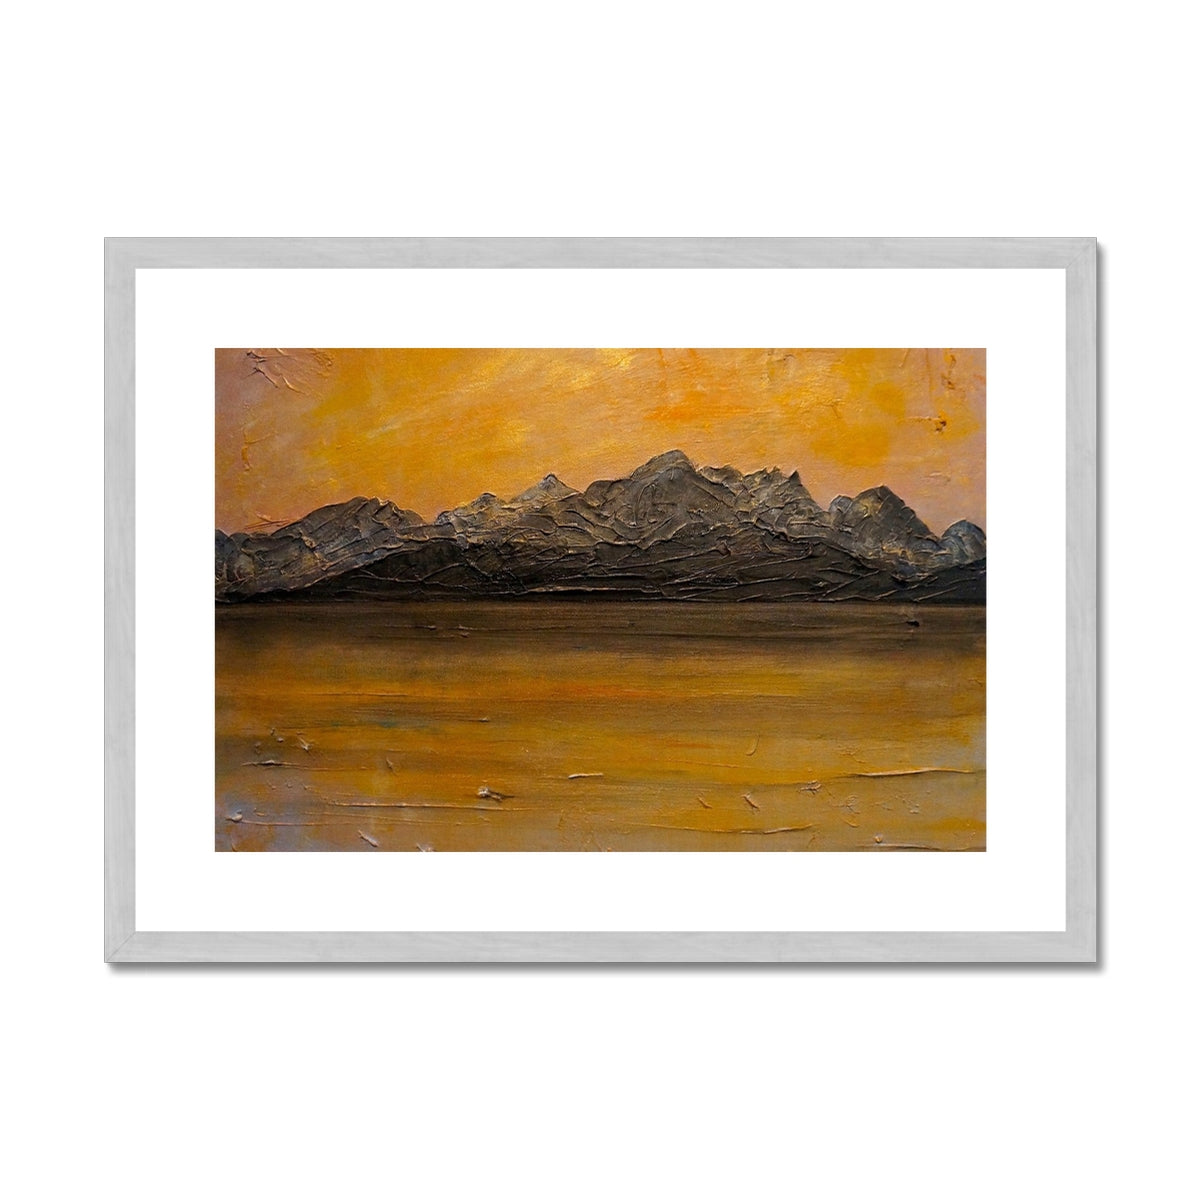 Cuillin Sunset Skye Painting | Antique Framed & Mounted Prints From Scotland-Antique Framed & Mounted Prints-Skye Art Gallery-A2 Landscape-Silver Frame-Paintings, Prints, Homeware, Art Gifts From Scotland By Scottish Artist Kevin Hunter